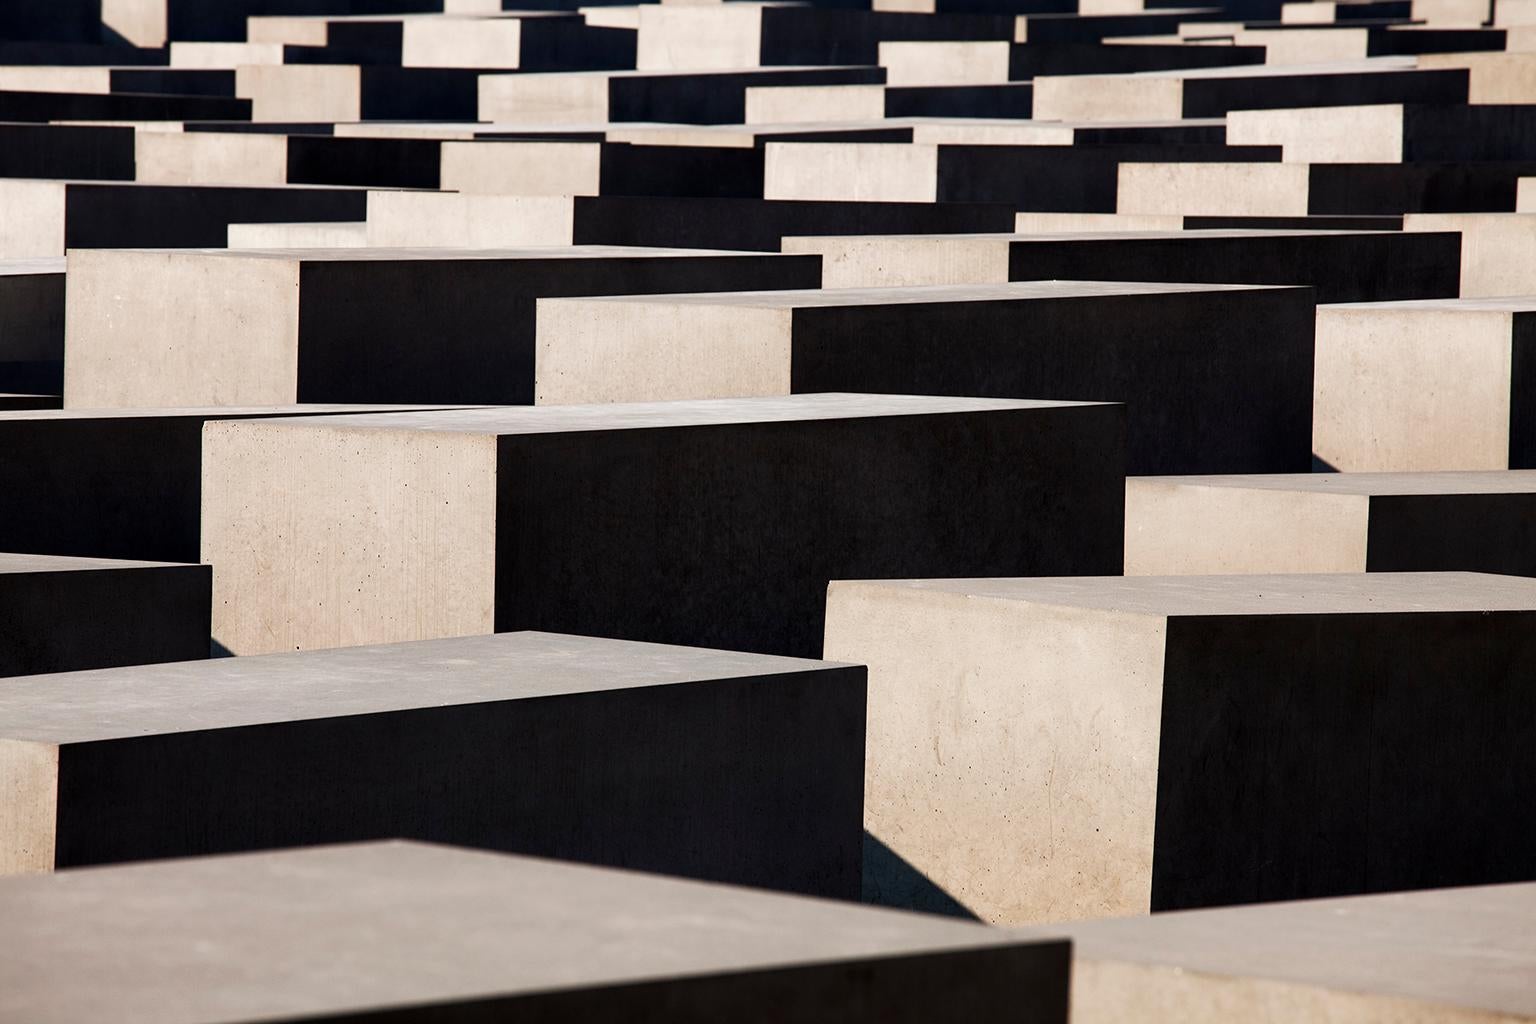  Cosmo Condina Landscape Photograph - " Memorial I to the Murdered Jews of Europe", Berlin Germany.